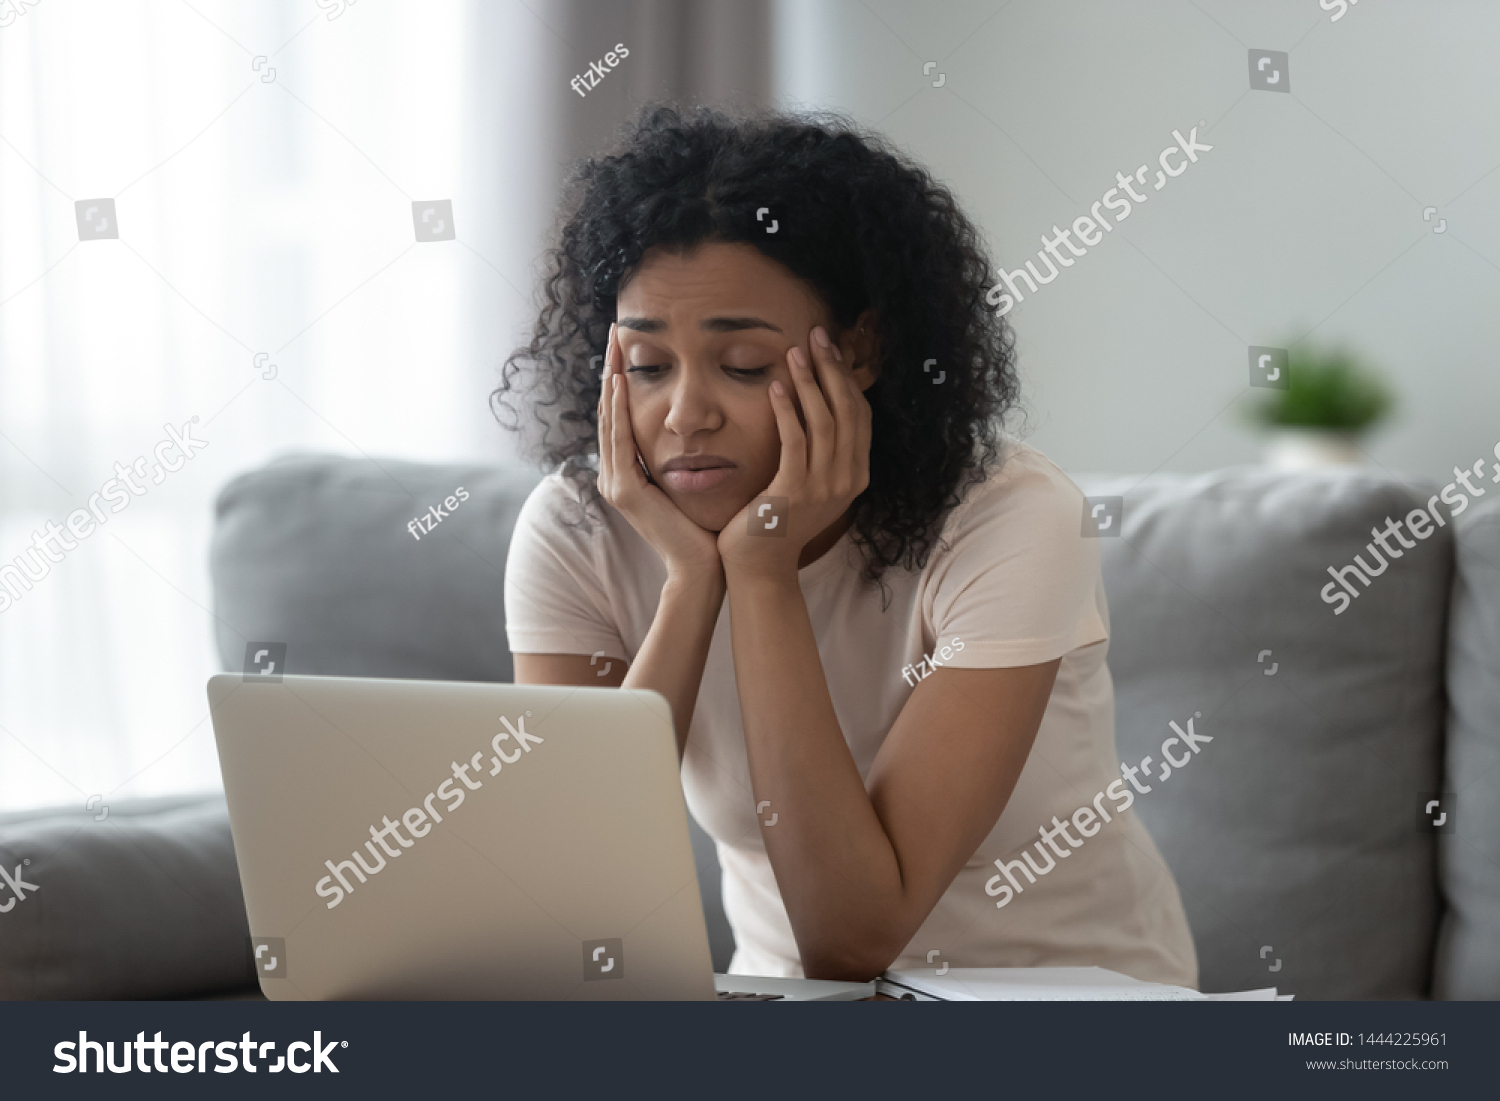 Bored young african american girl tired of learning sit at home looking at laptop, lazy apathetic black female university student frustrated about study computer work feeling uninterested demotivated #1444225961